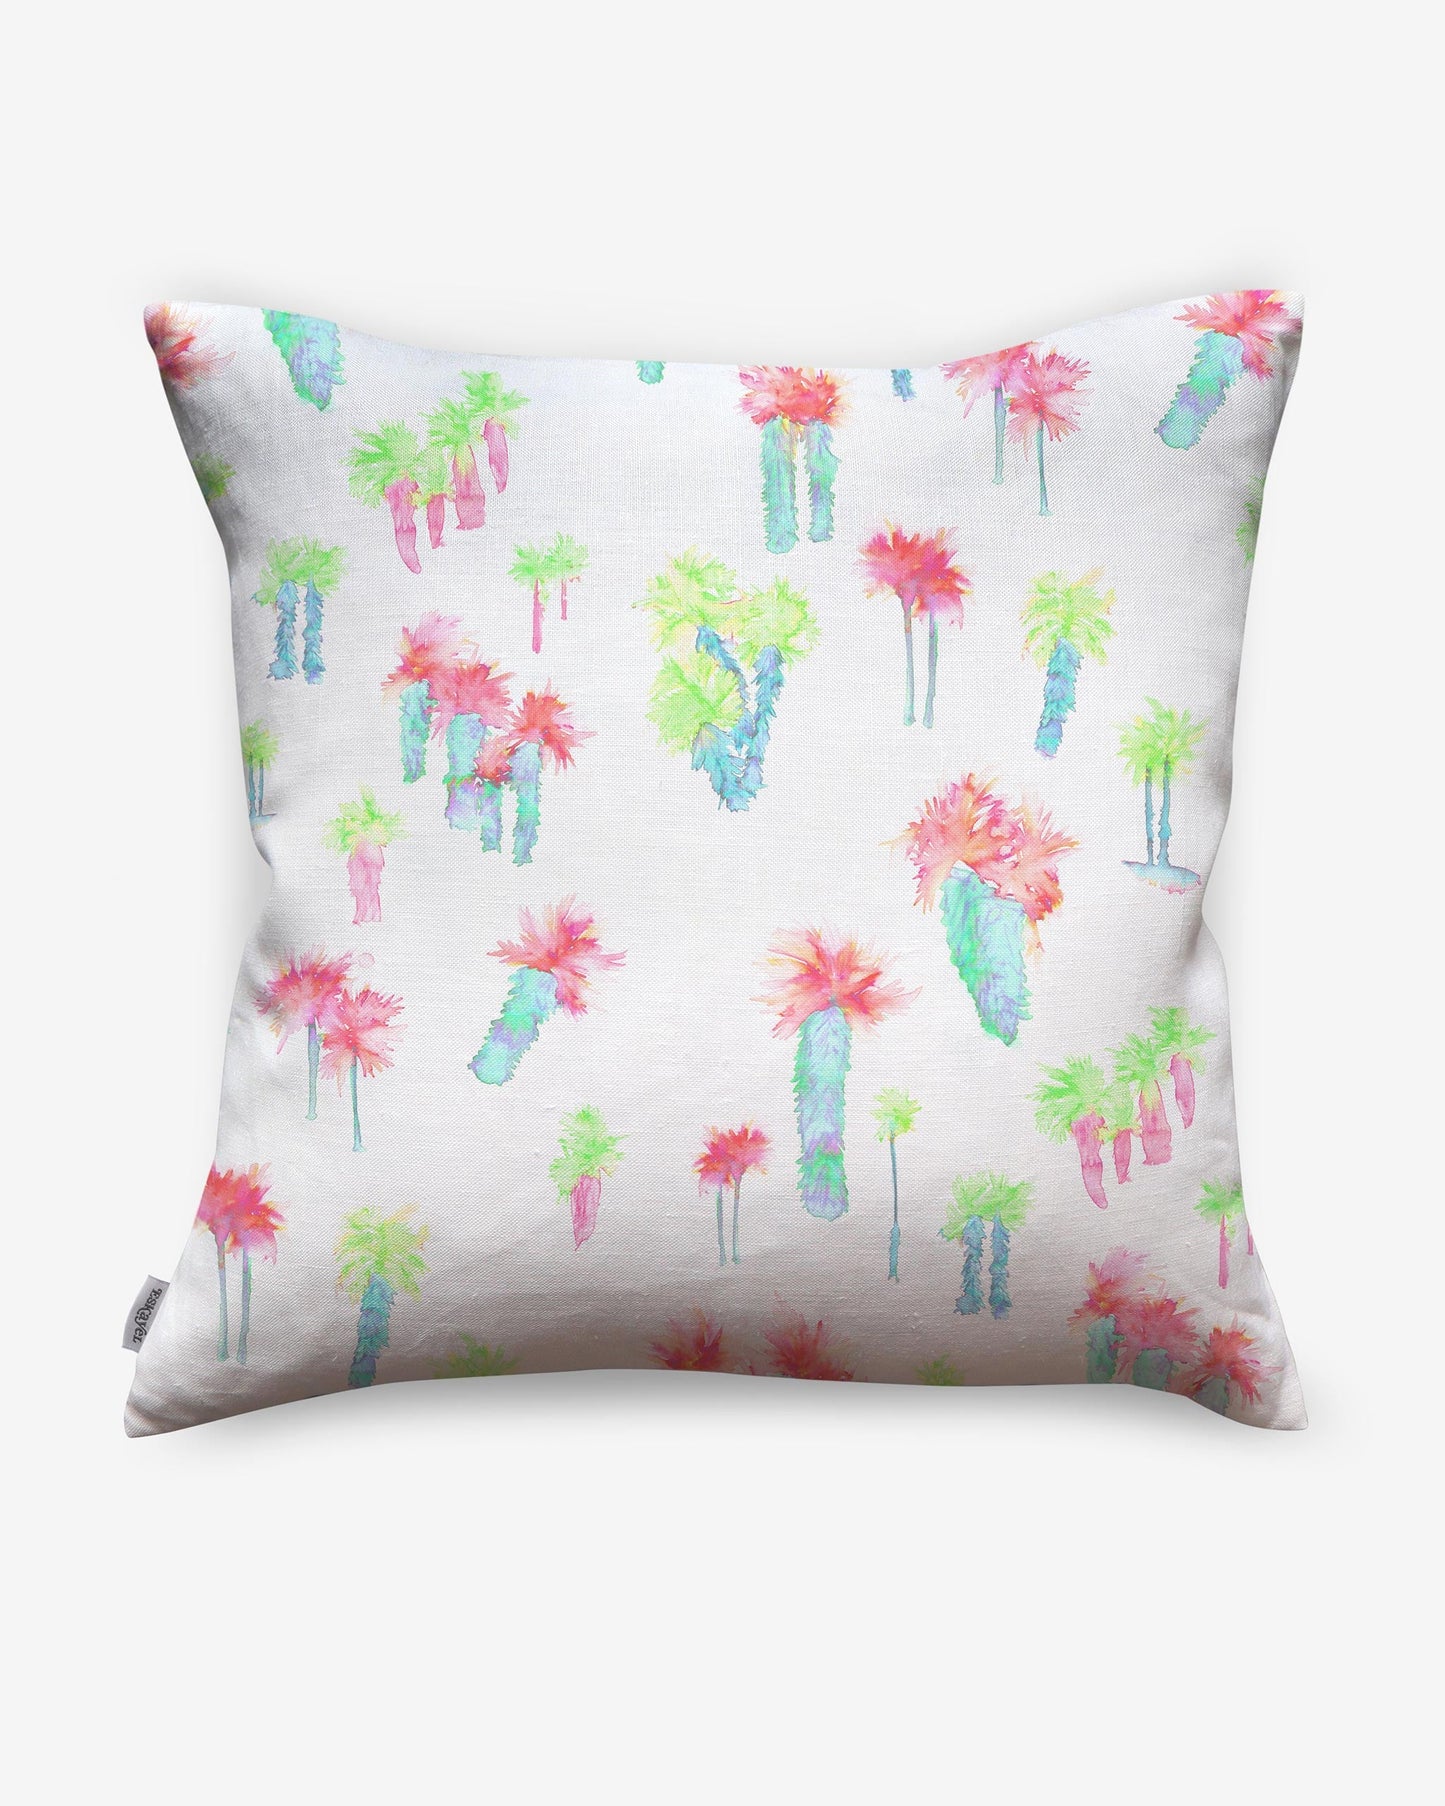 A luxury Perfect Palm Pillow with colorful cactus trees in a watercolor style